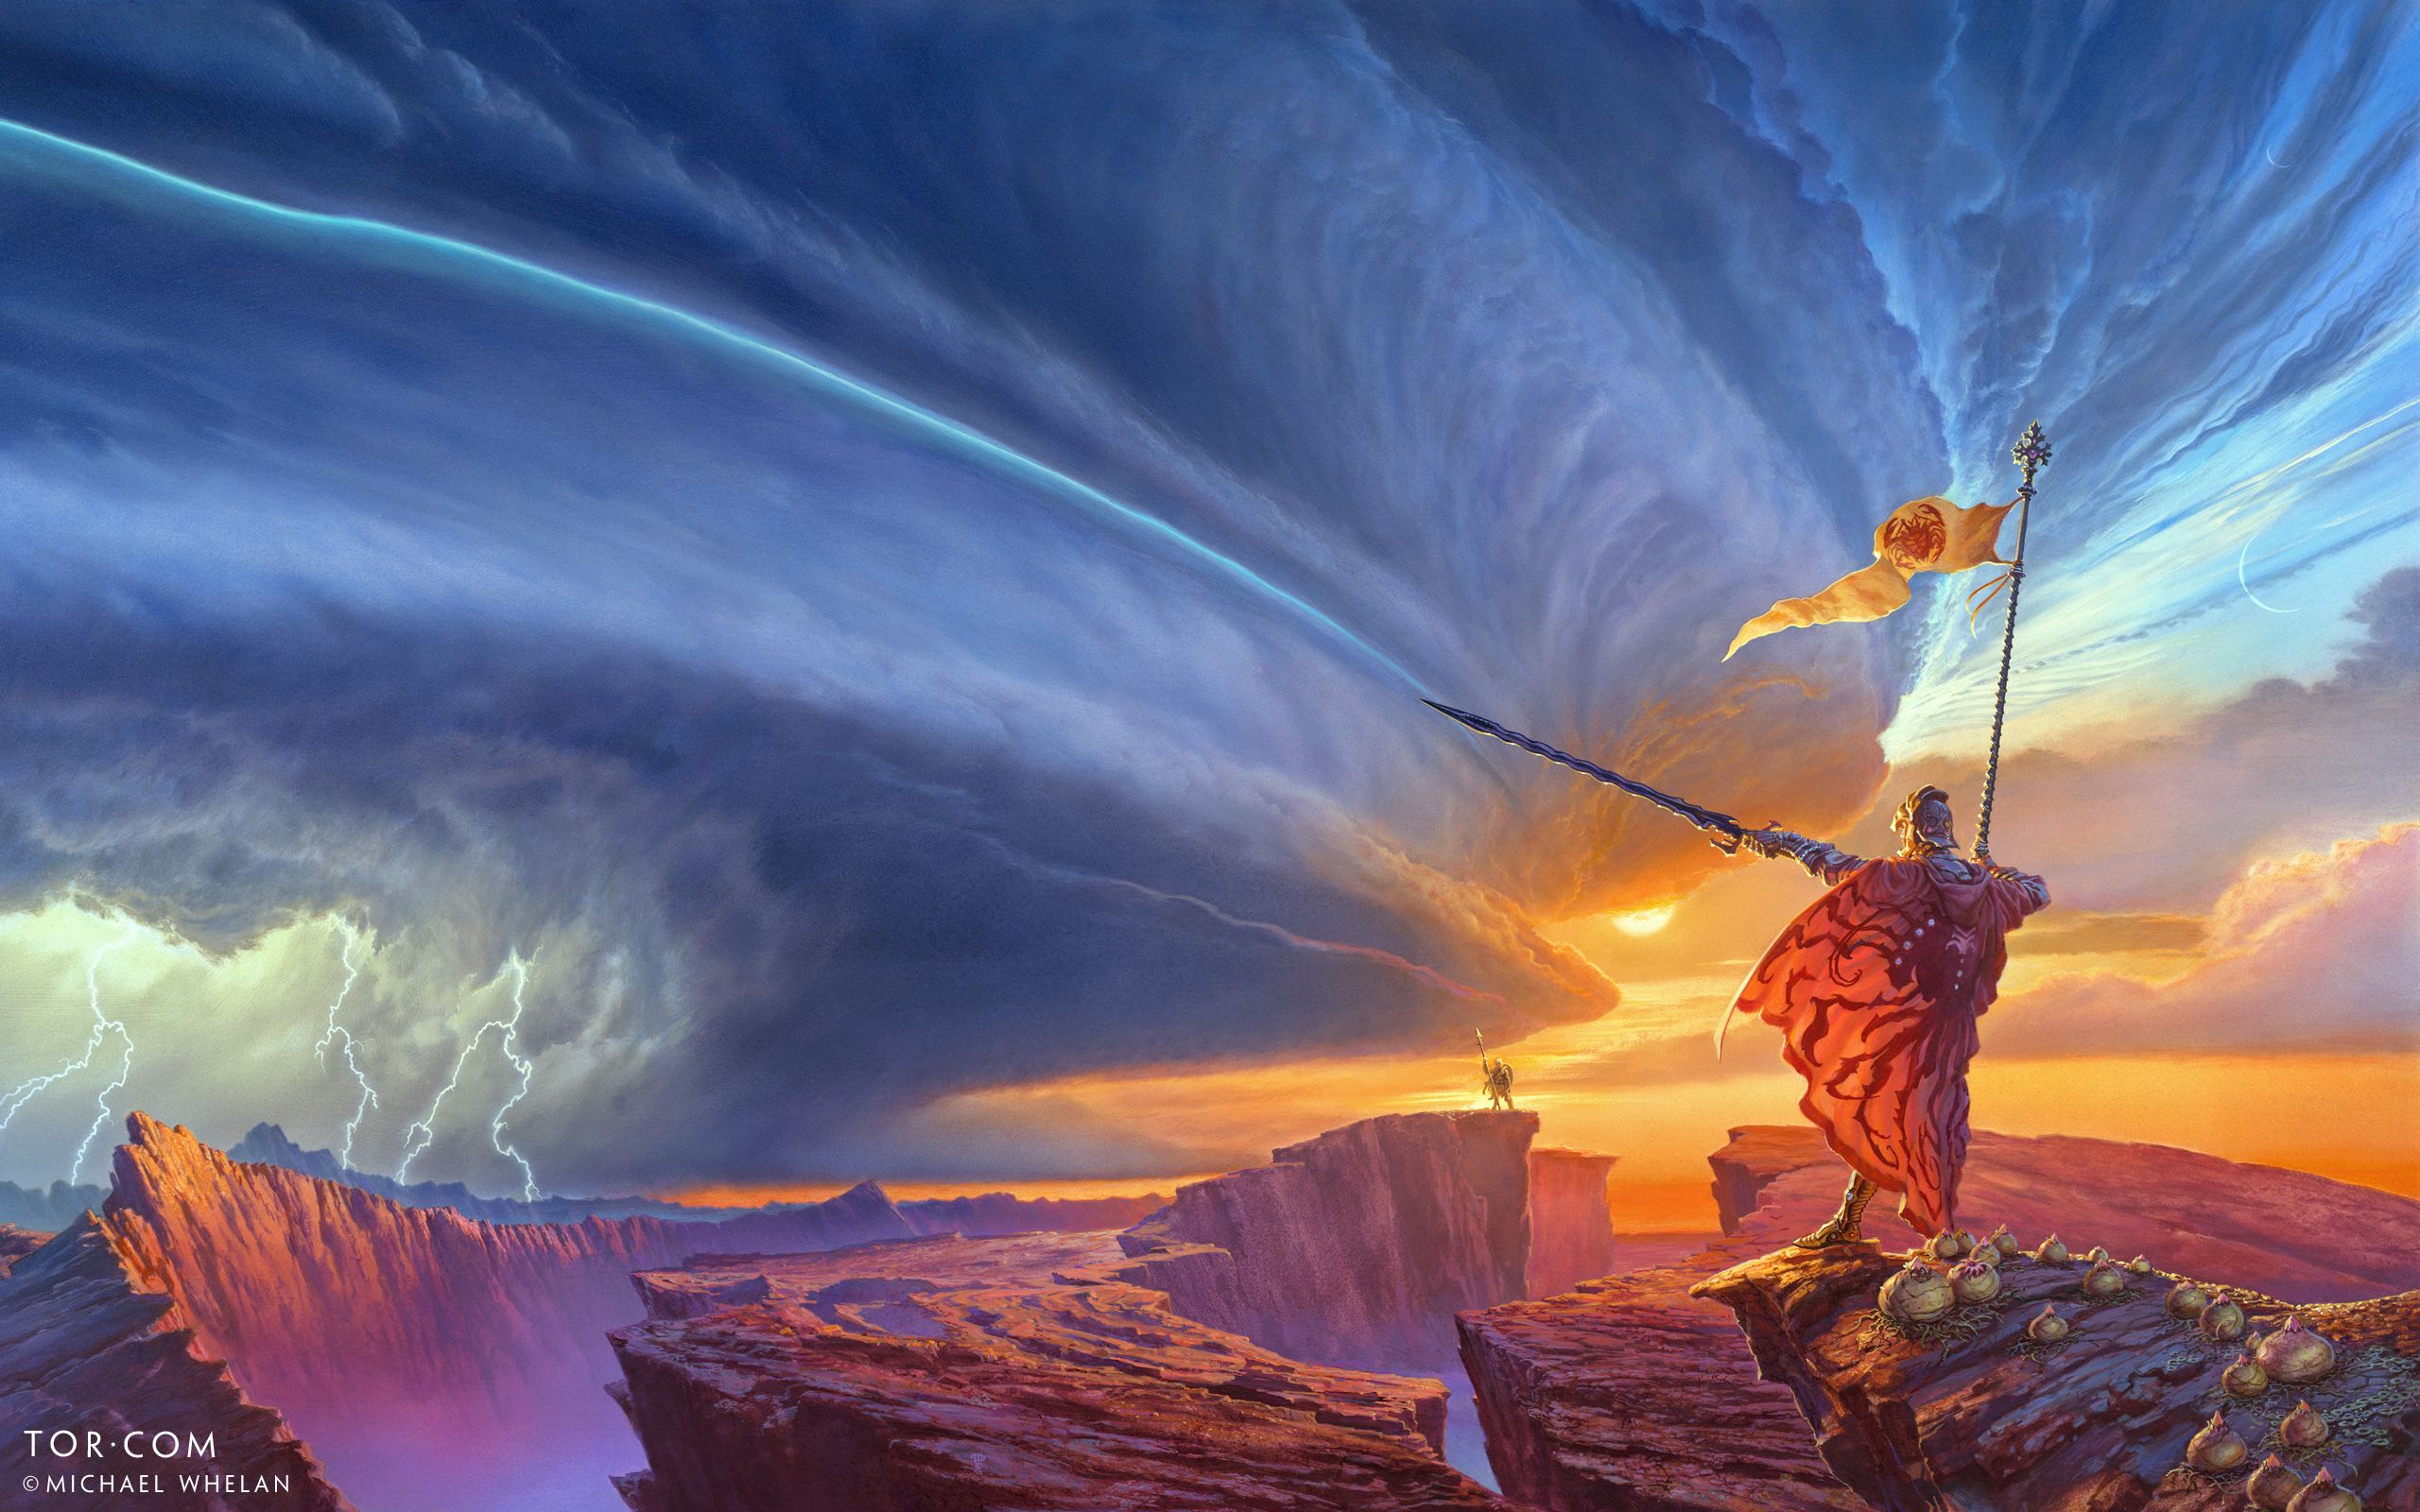 Download Wallpaper for Brandon Sanderson's The Way of Kings, Illustrated by Artist Michael Whelan